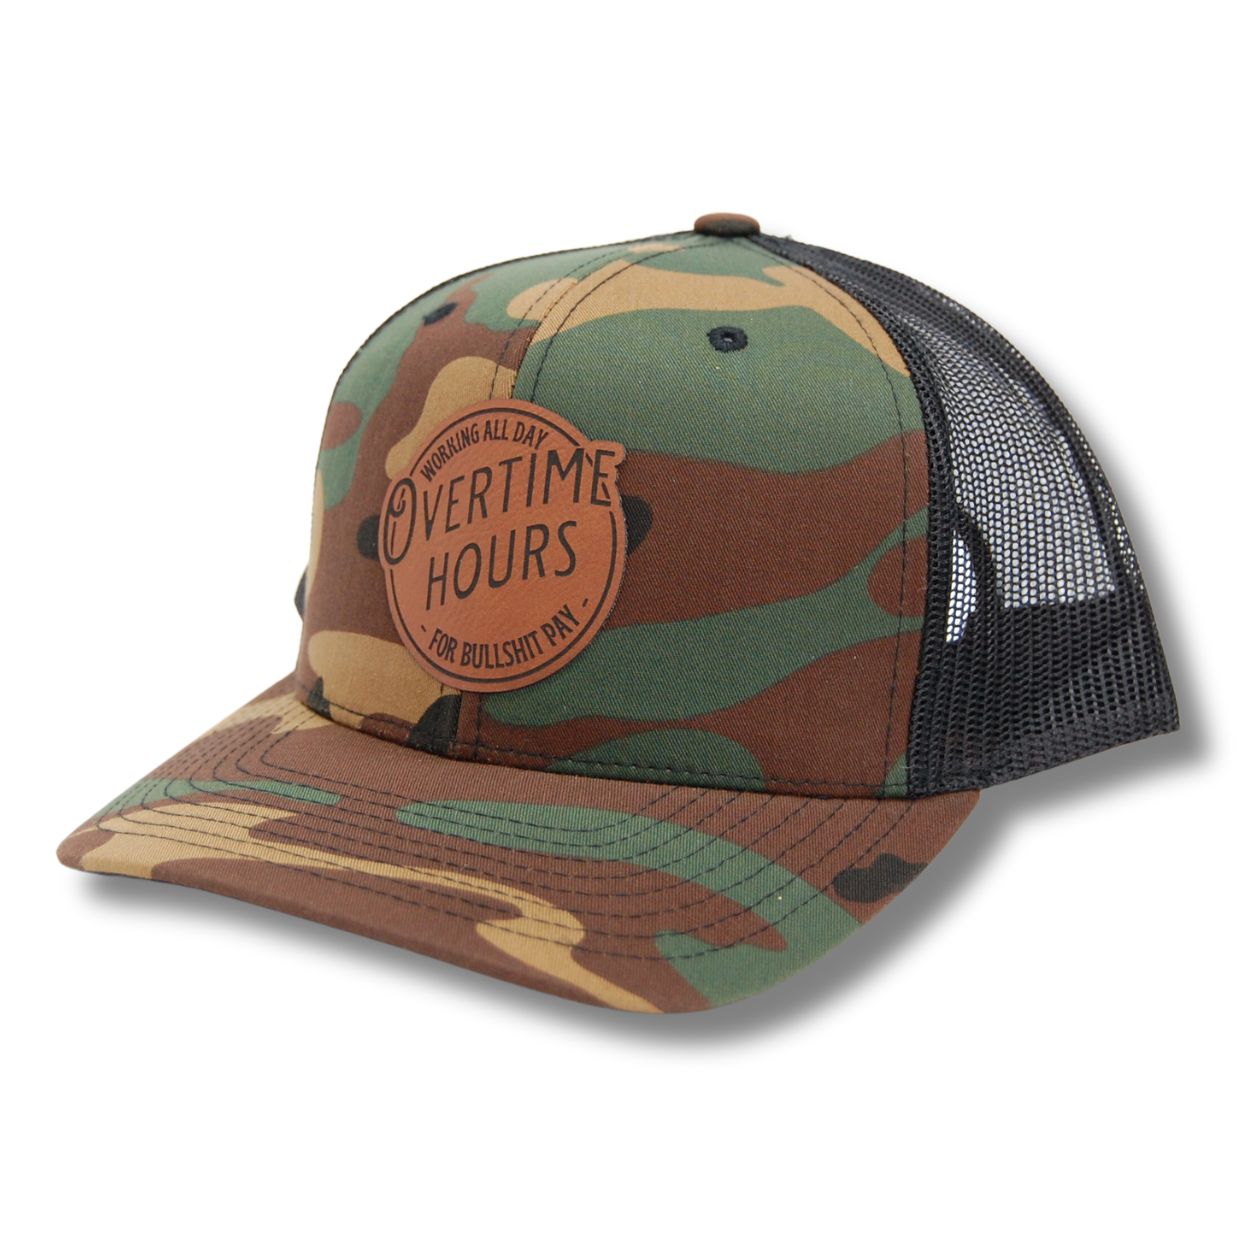 Oliver Anthony Hat - support Blue collar america blue collar apparel  camo hat